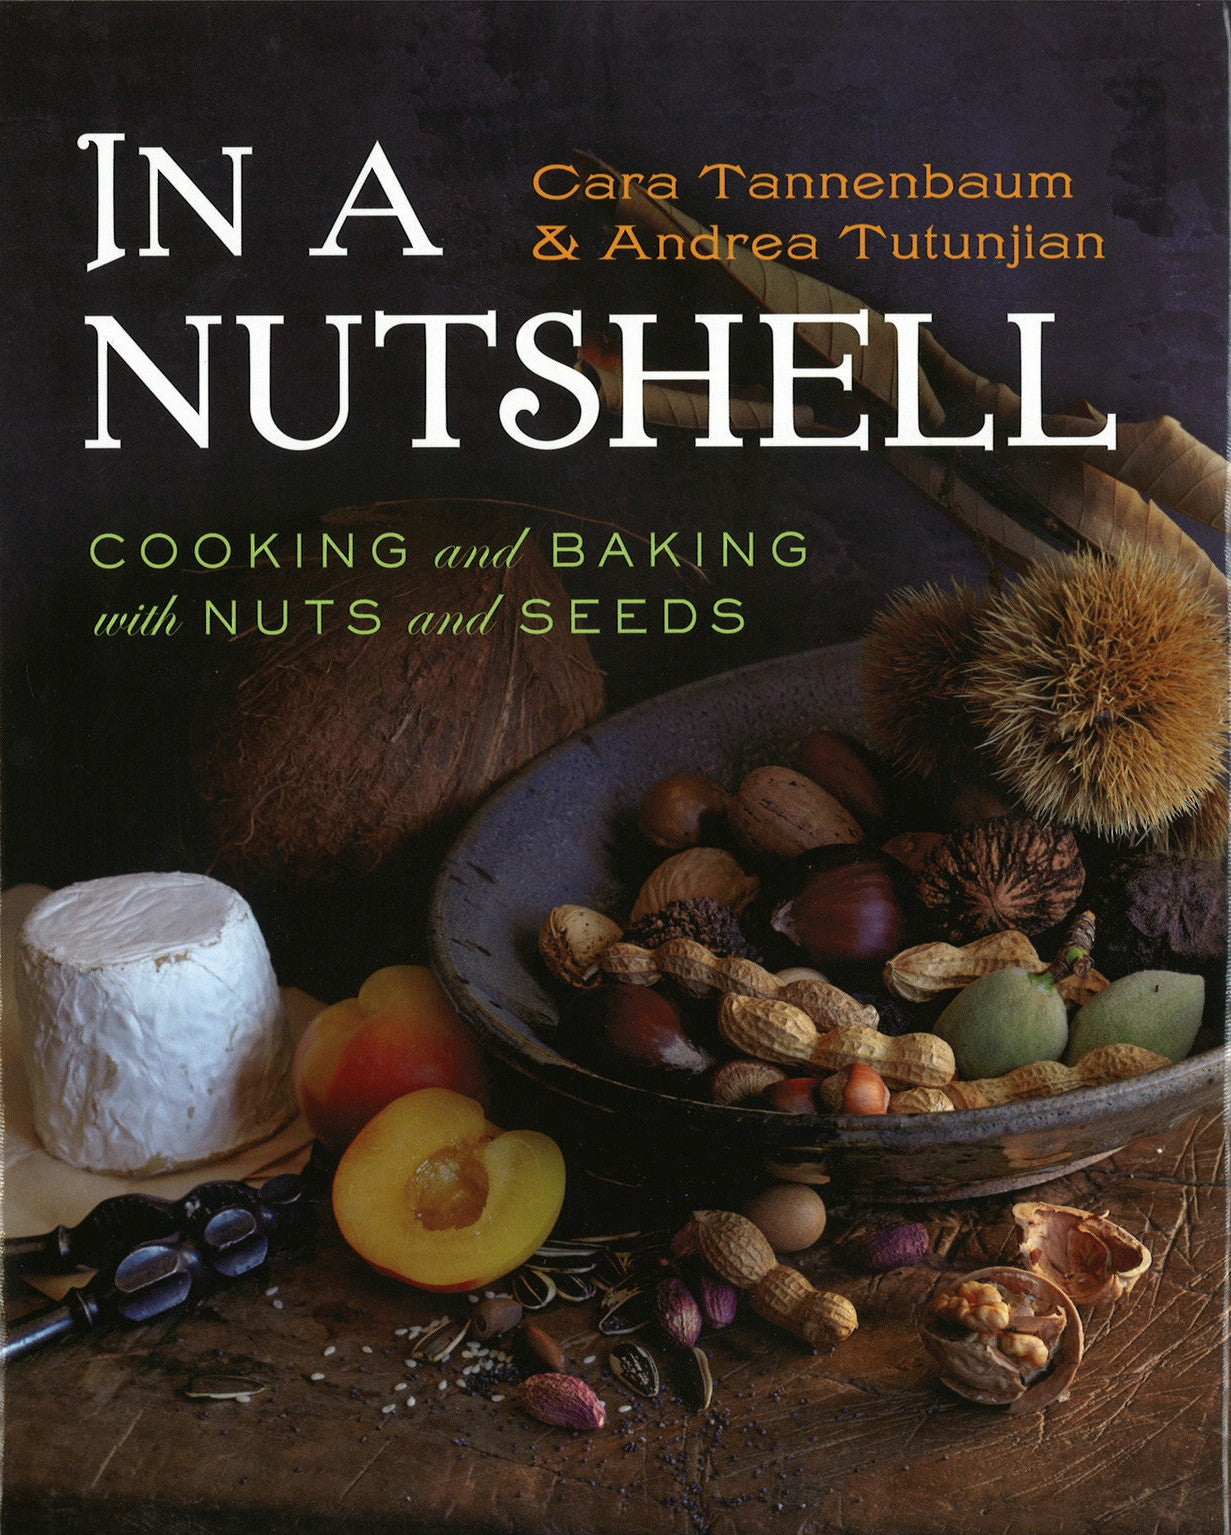 IN A NUTSHELL: Cooking and Baking with Nuts and Seeds